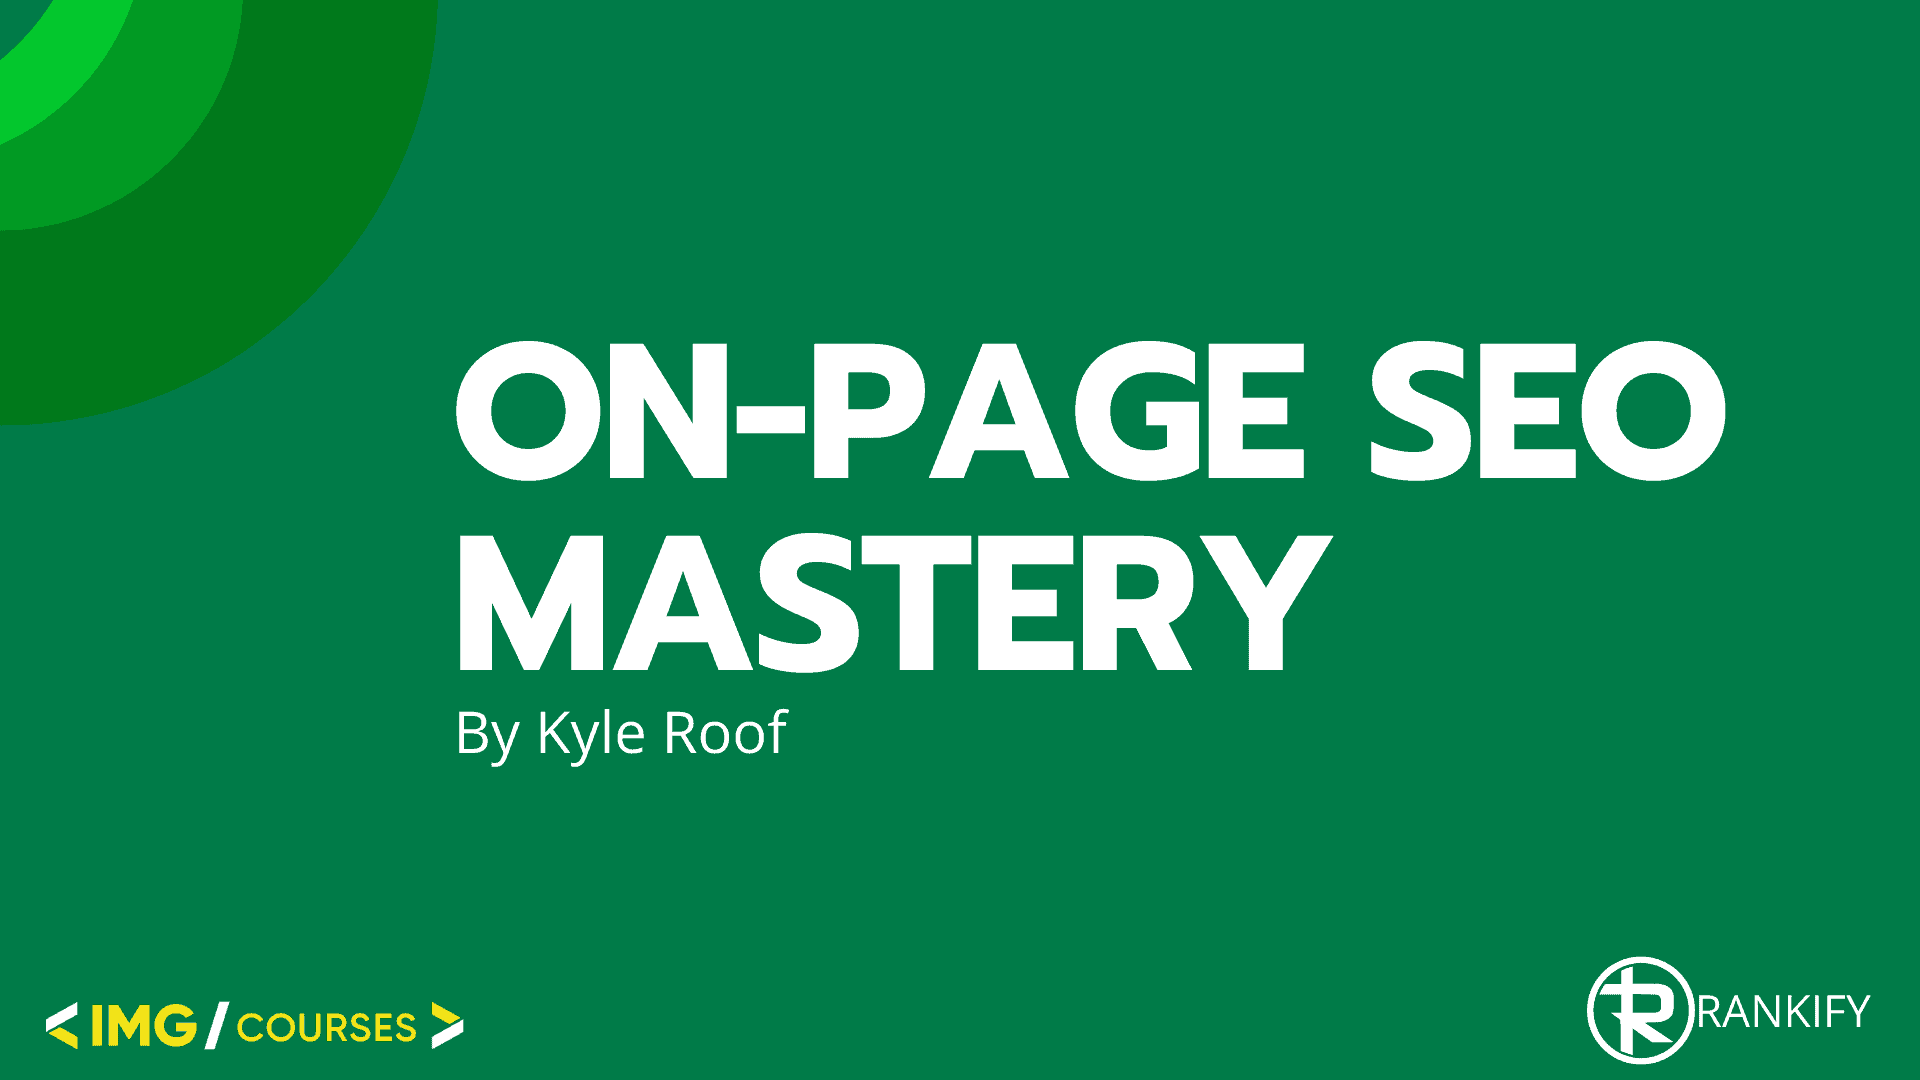 On Page SEO - Kyle Roof